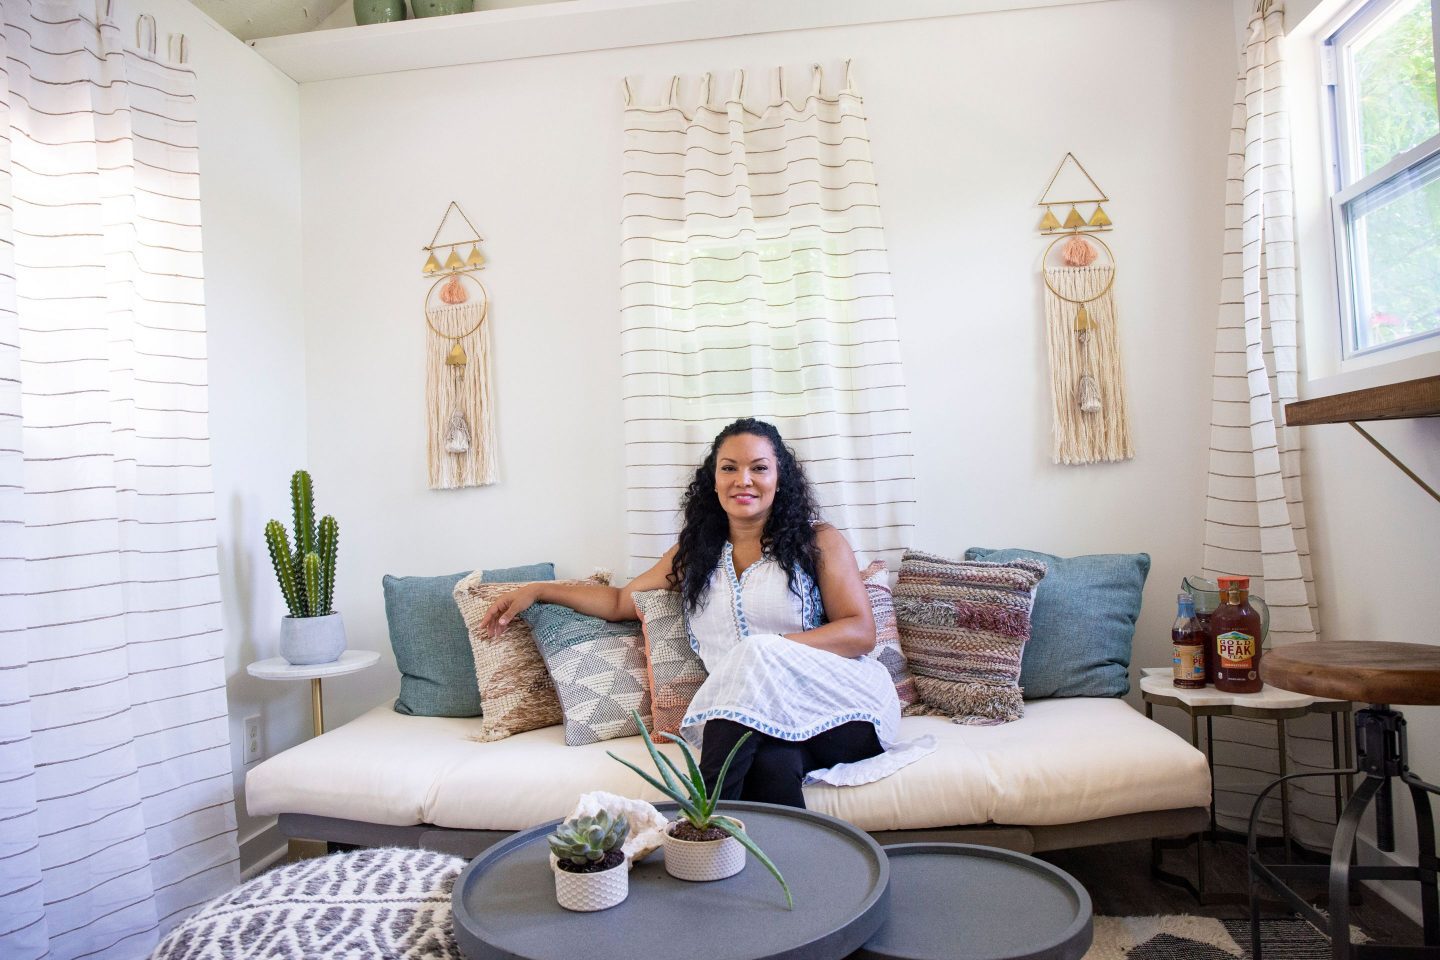 Egypt Sherrod’s Tips to Create your own Backyard Summer Sanctuary (TEA Shed)